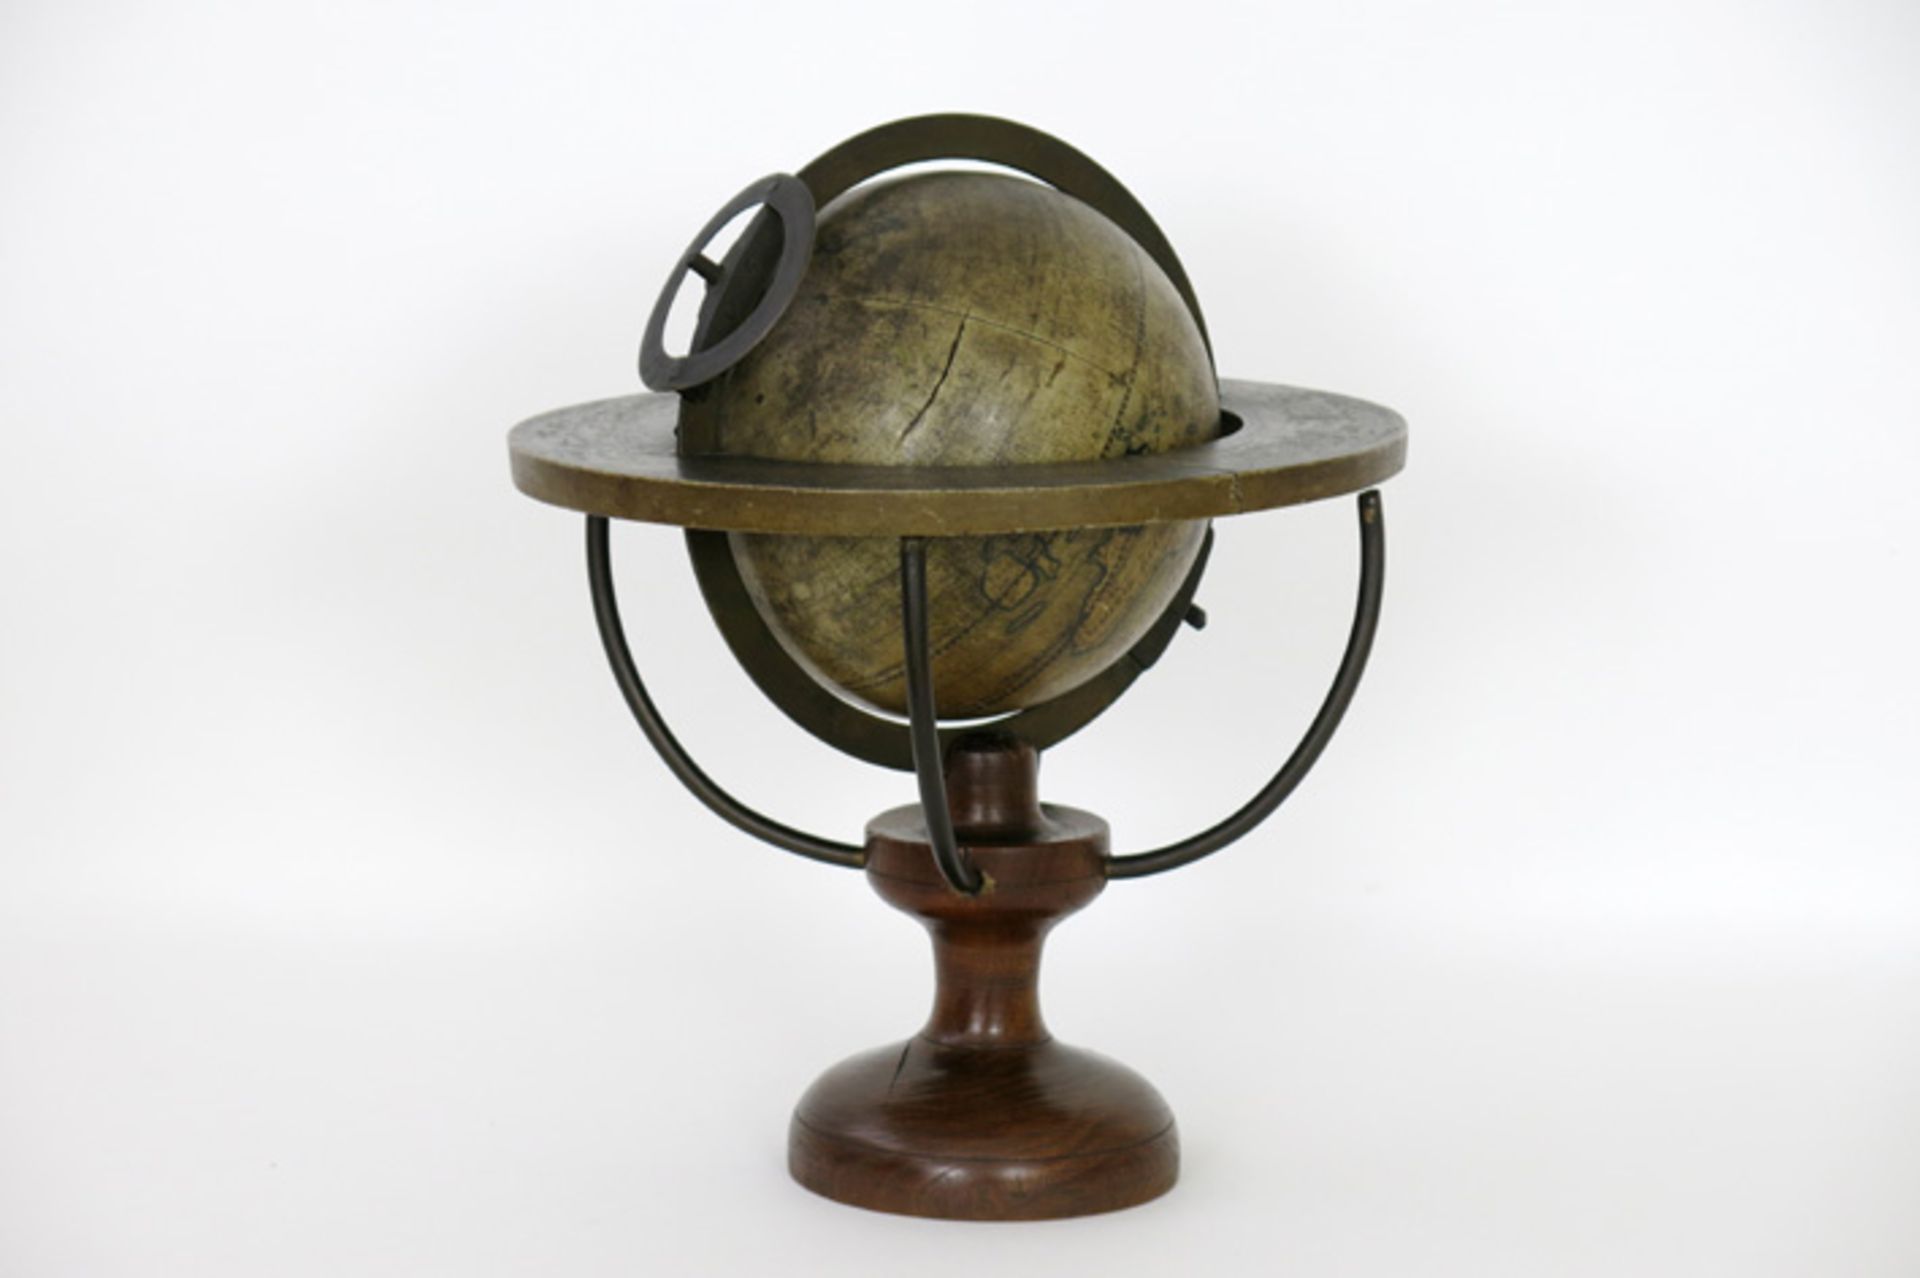 antique earth globe with brass ring and meridian on/in a wooden stand Antieke wereldbol met